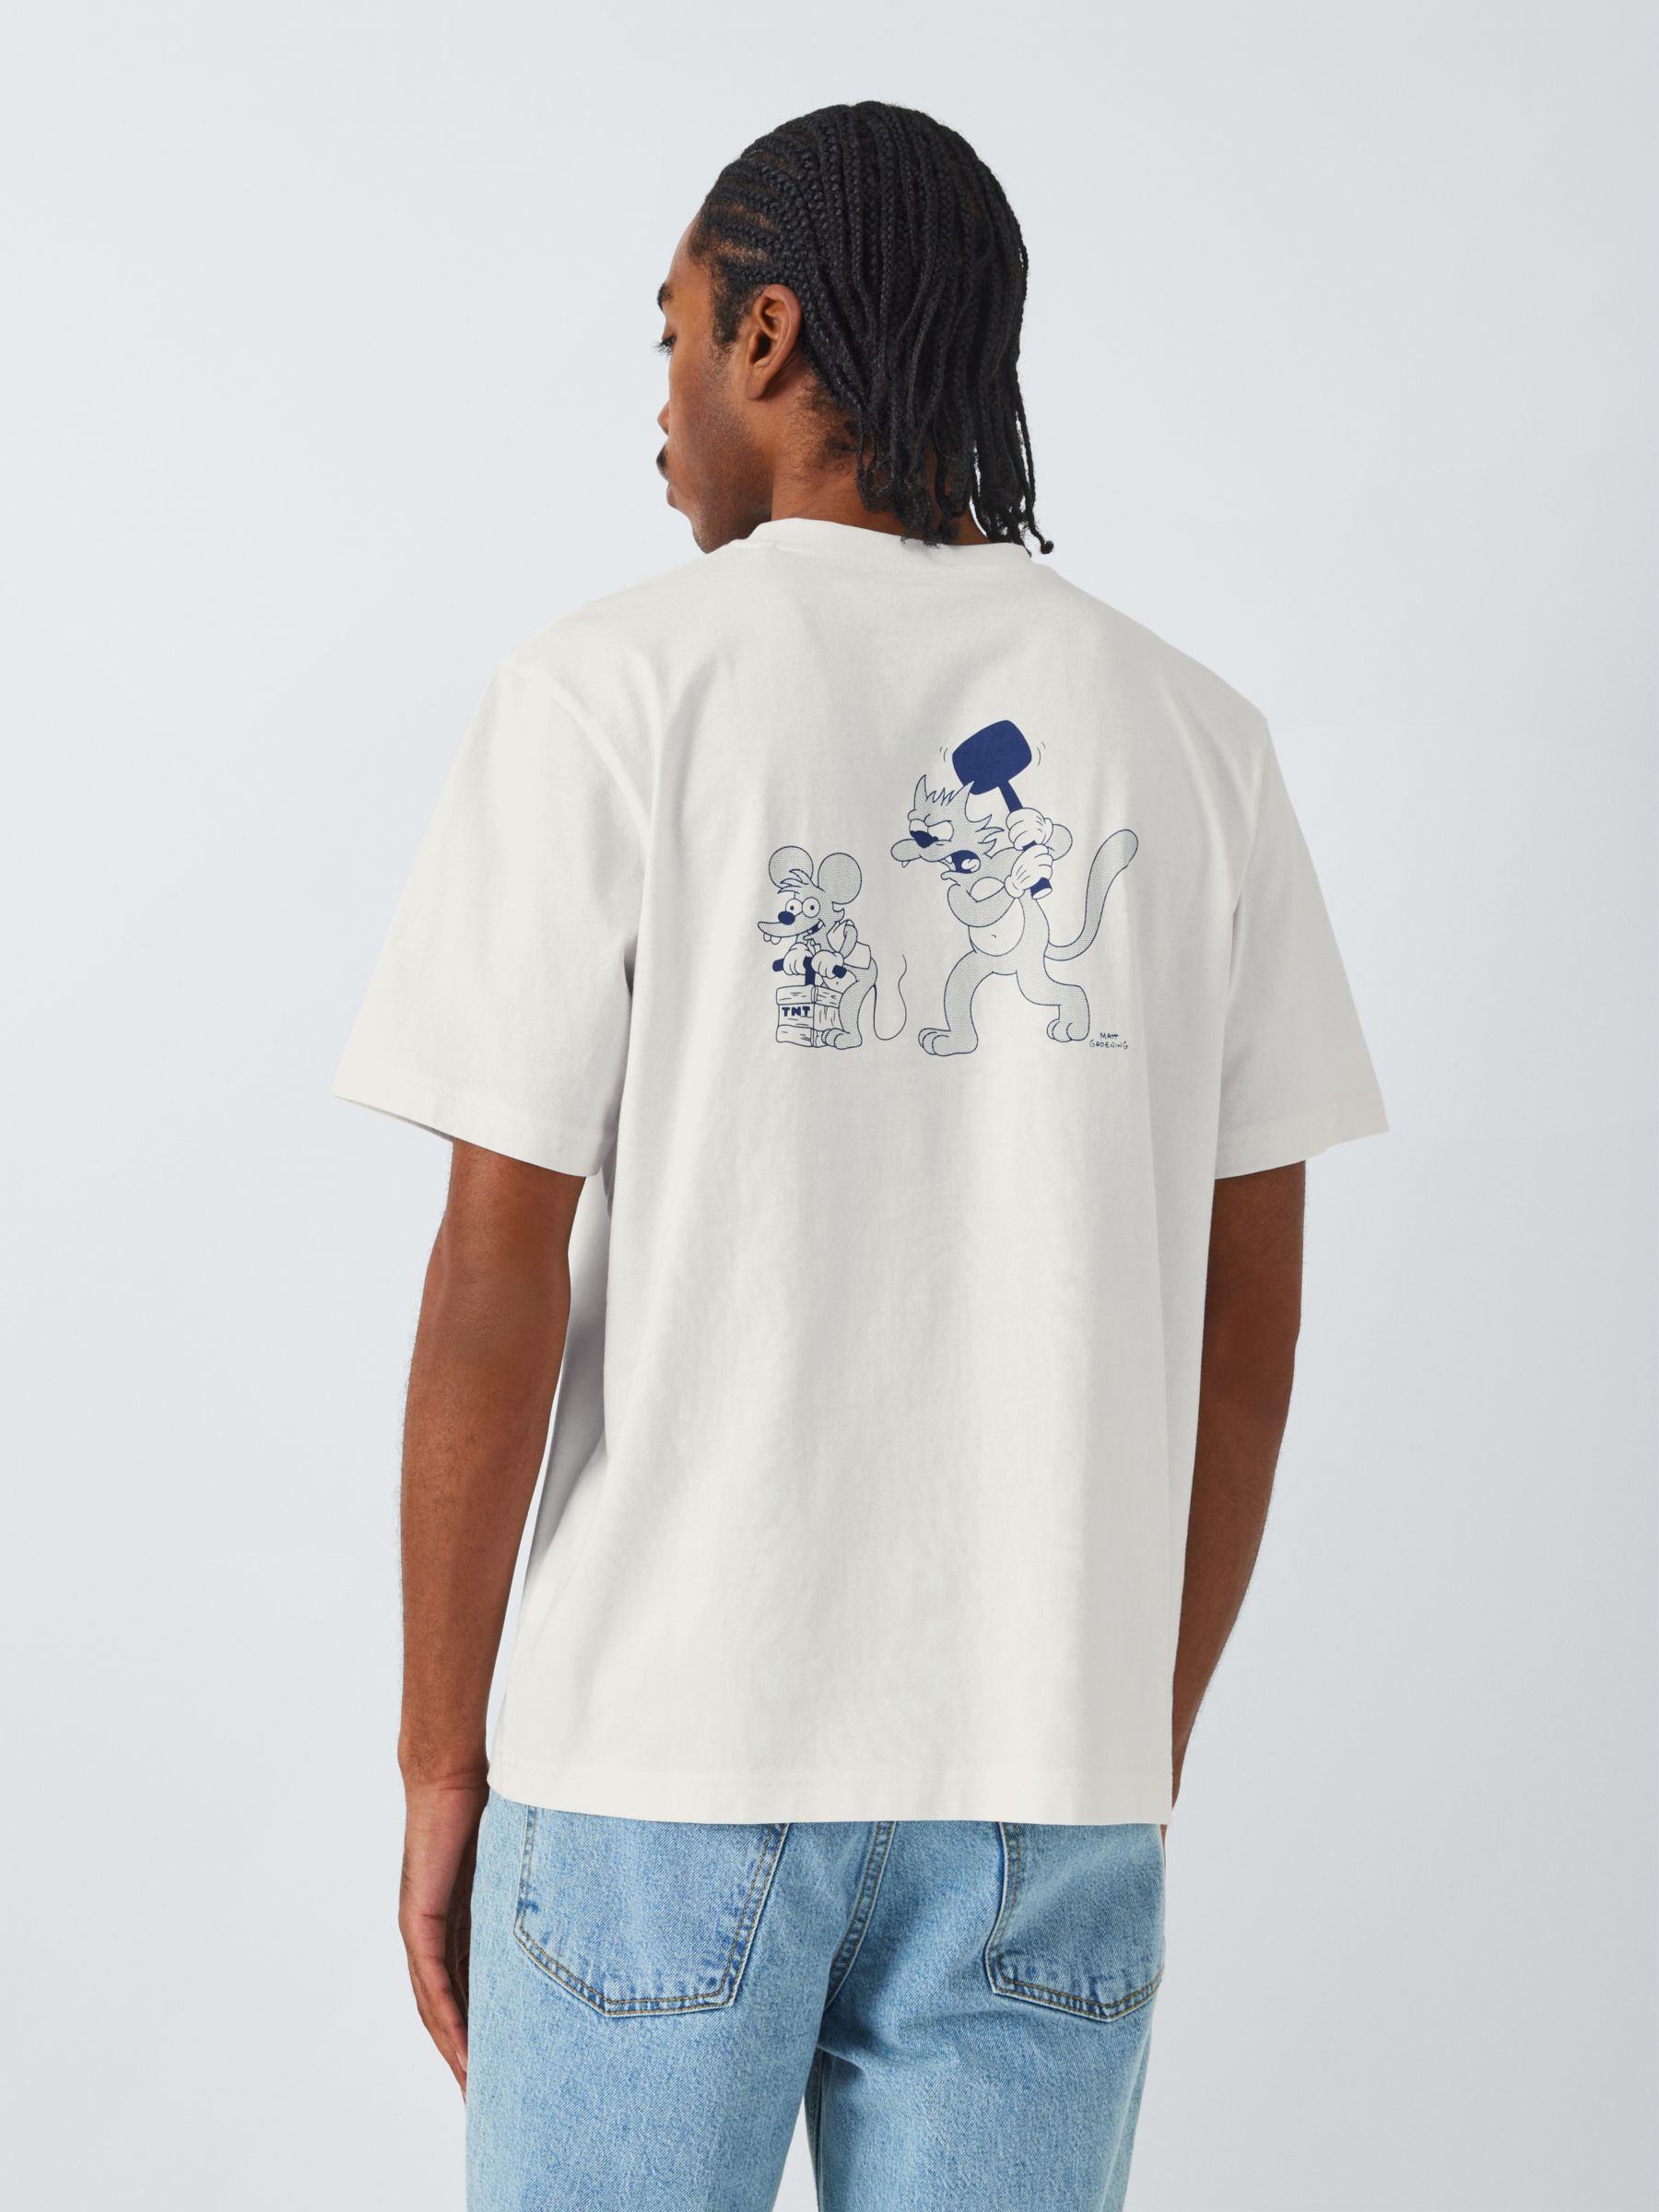 John Lewis ANYDAY X The Simpsons Itchy & Scratchy T-Shirt, Ecru, L